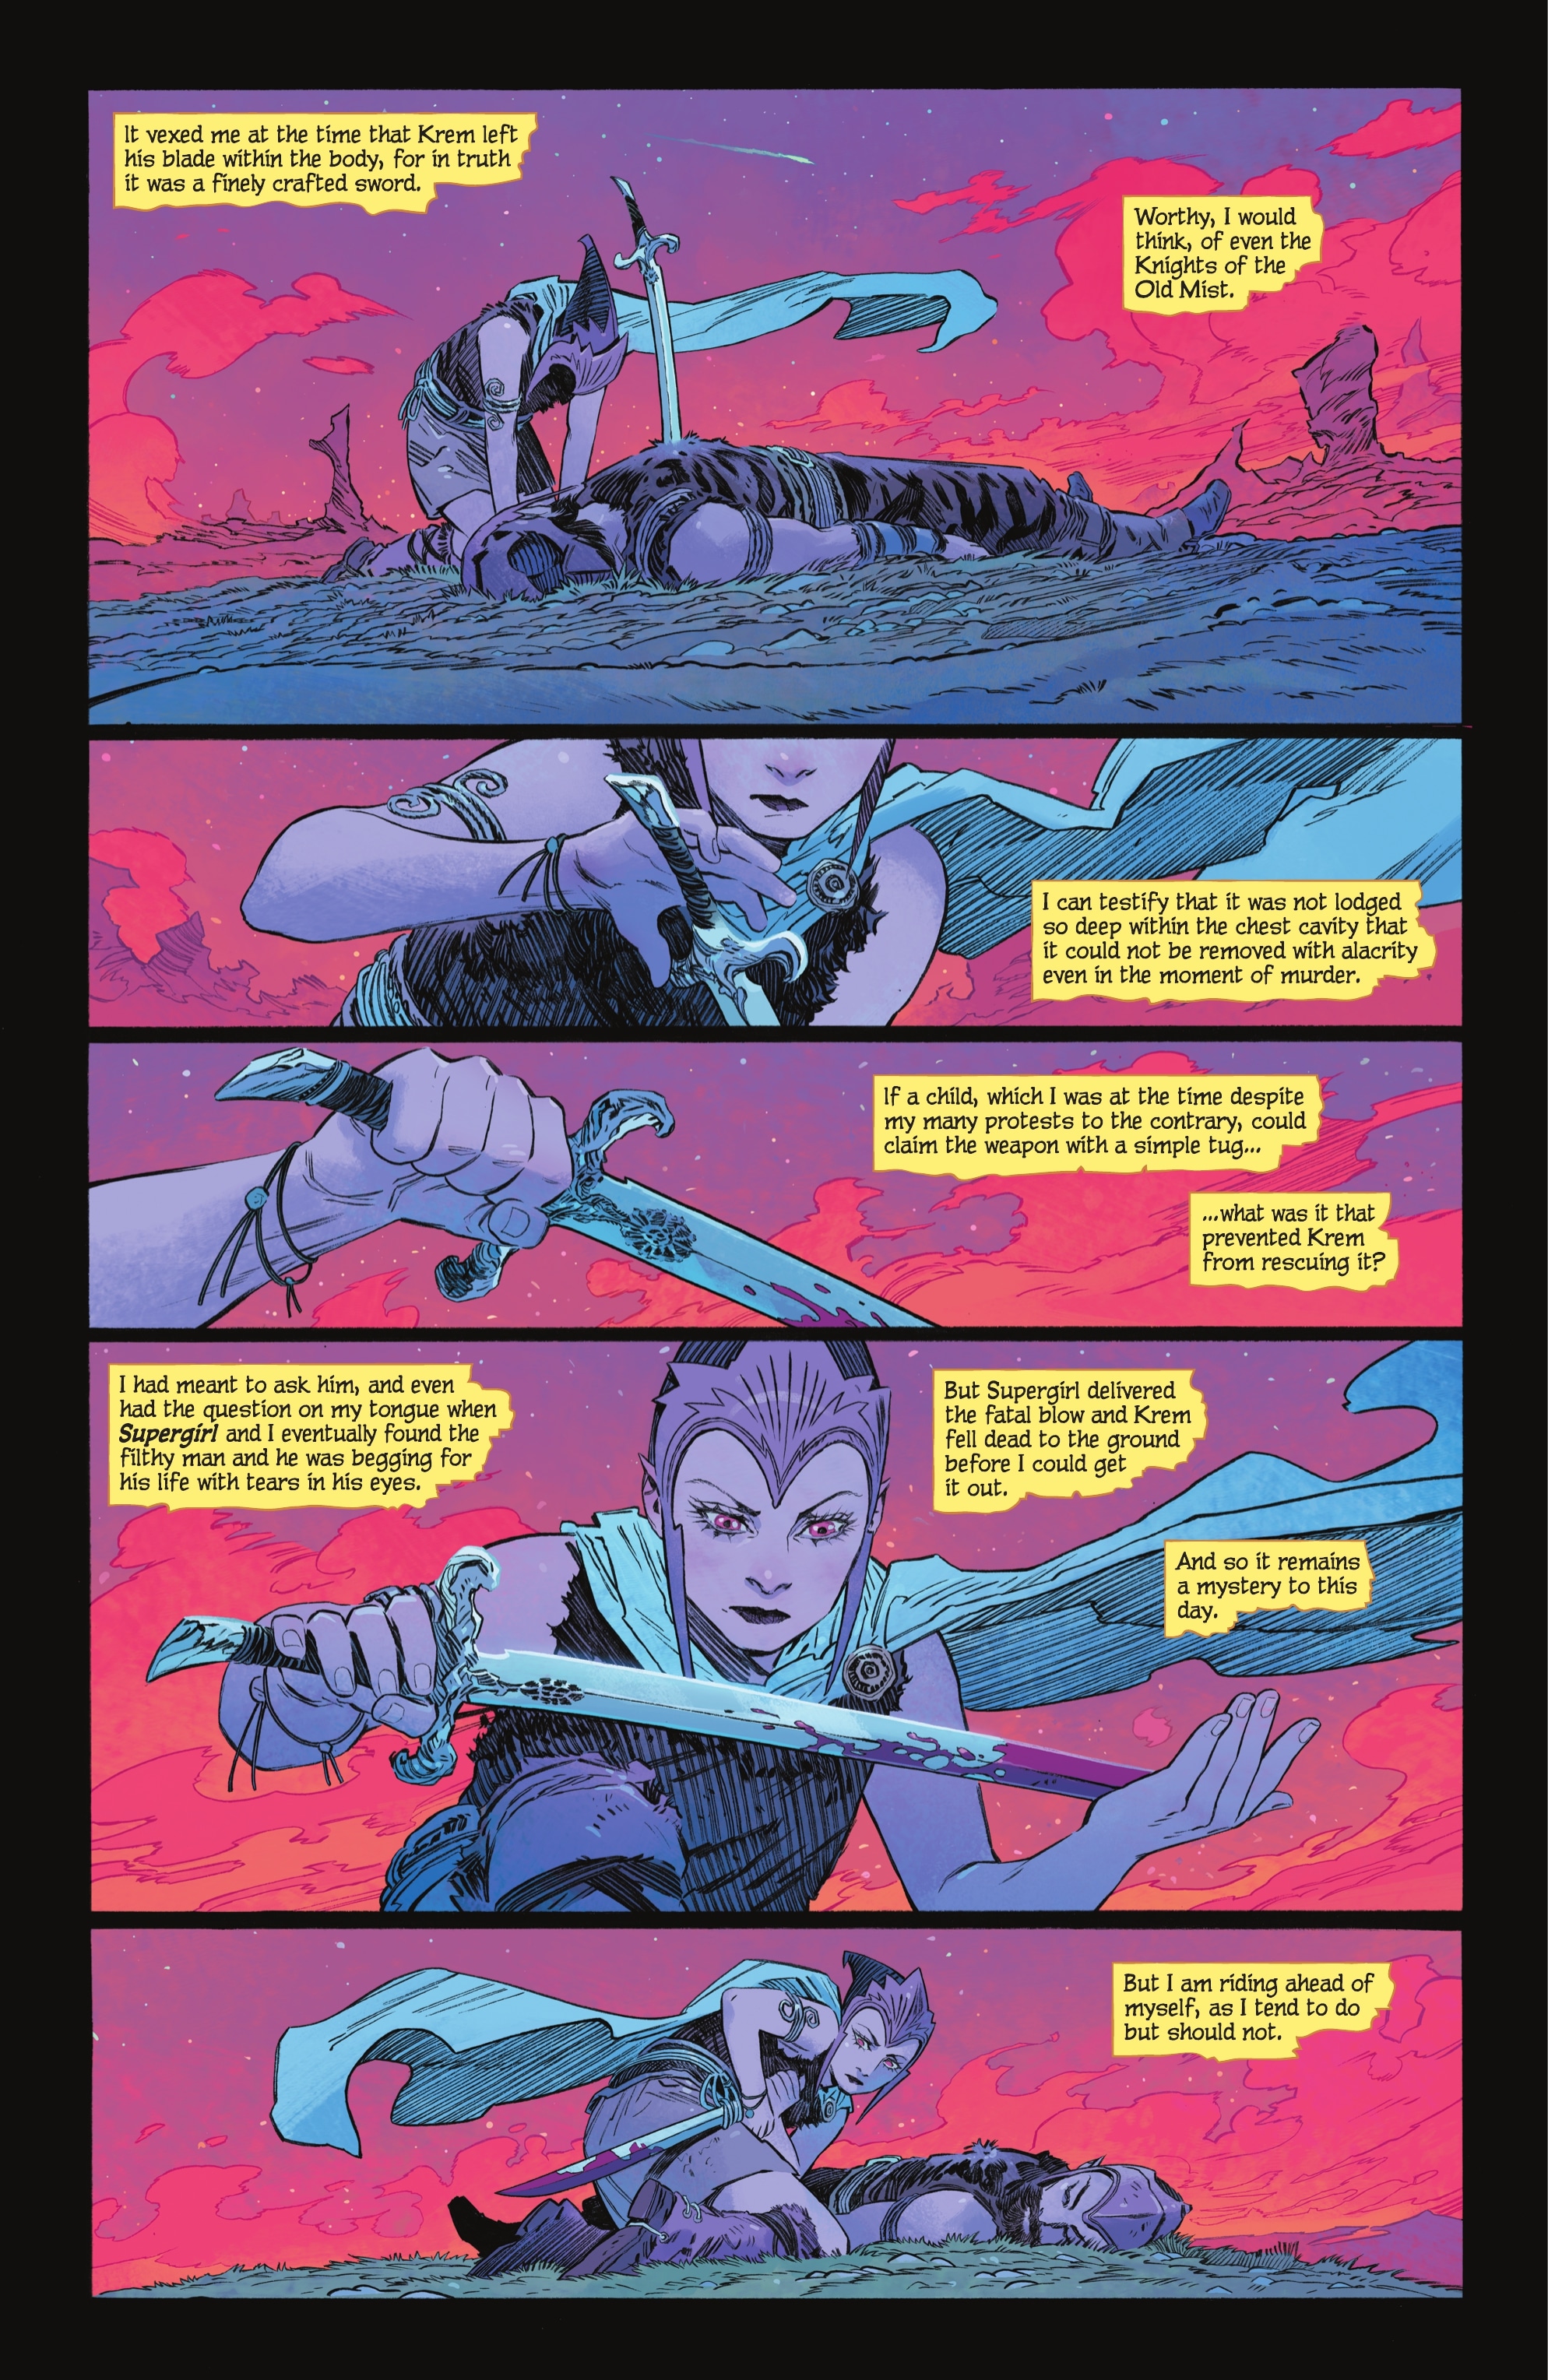 Supergirl: Woman of Tomorrow (2021-): Chapter 1 - Page 4